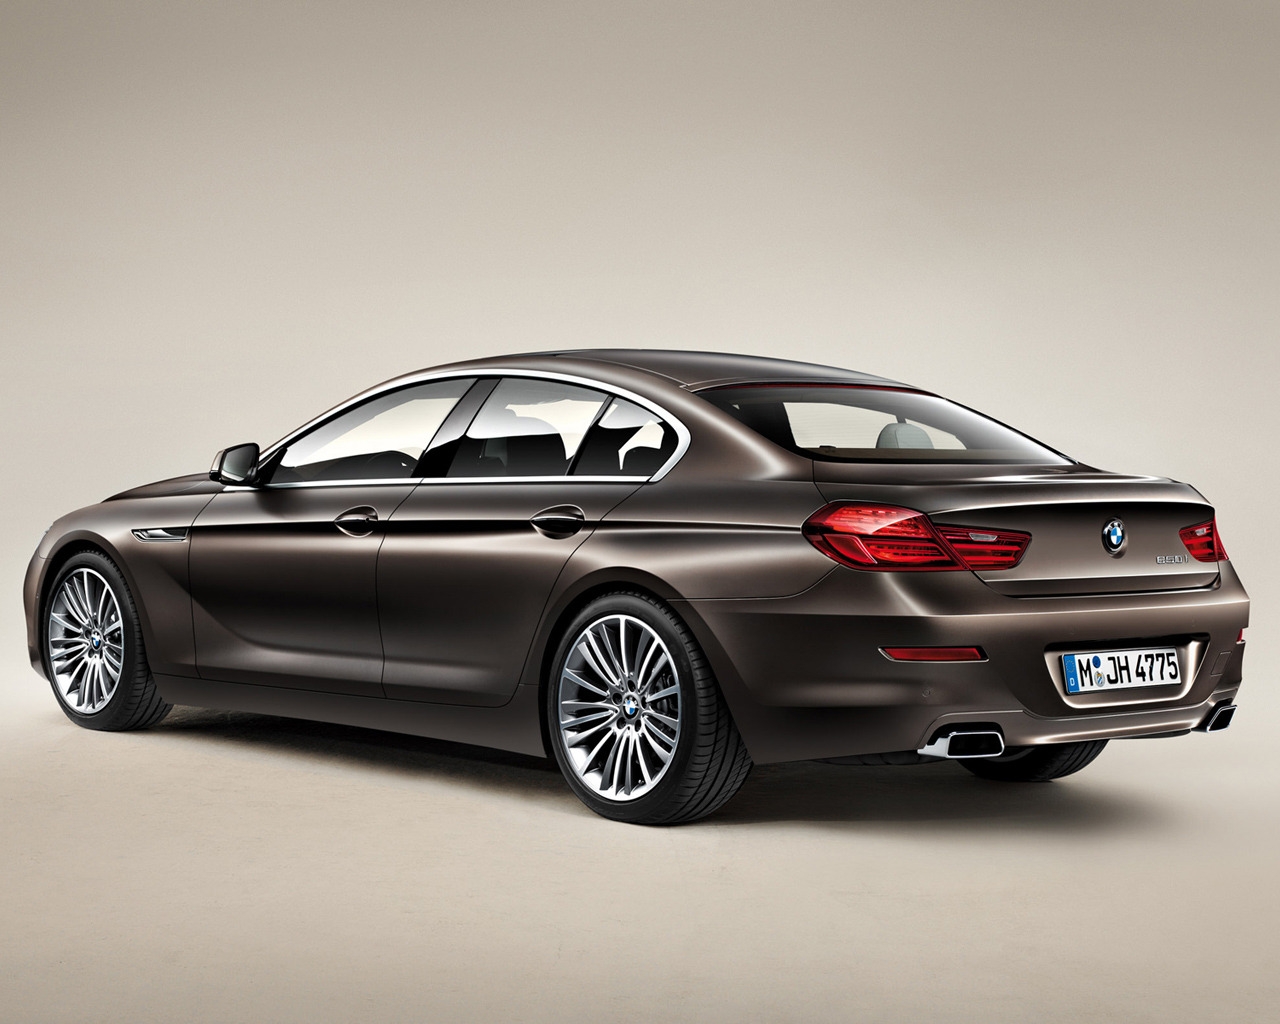 2013 BMW 6 Series Rear for 1280 x 1024 resolution